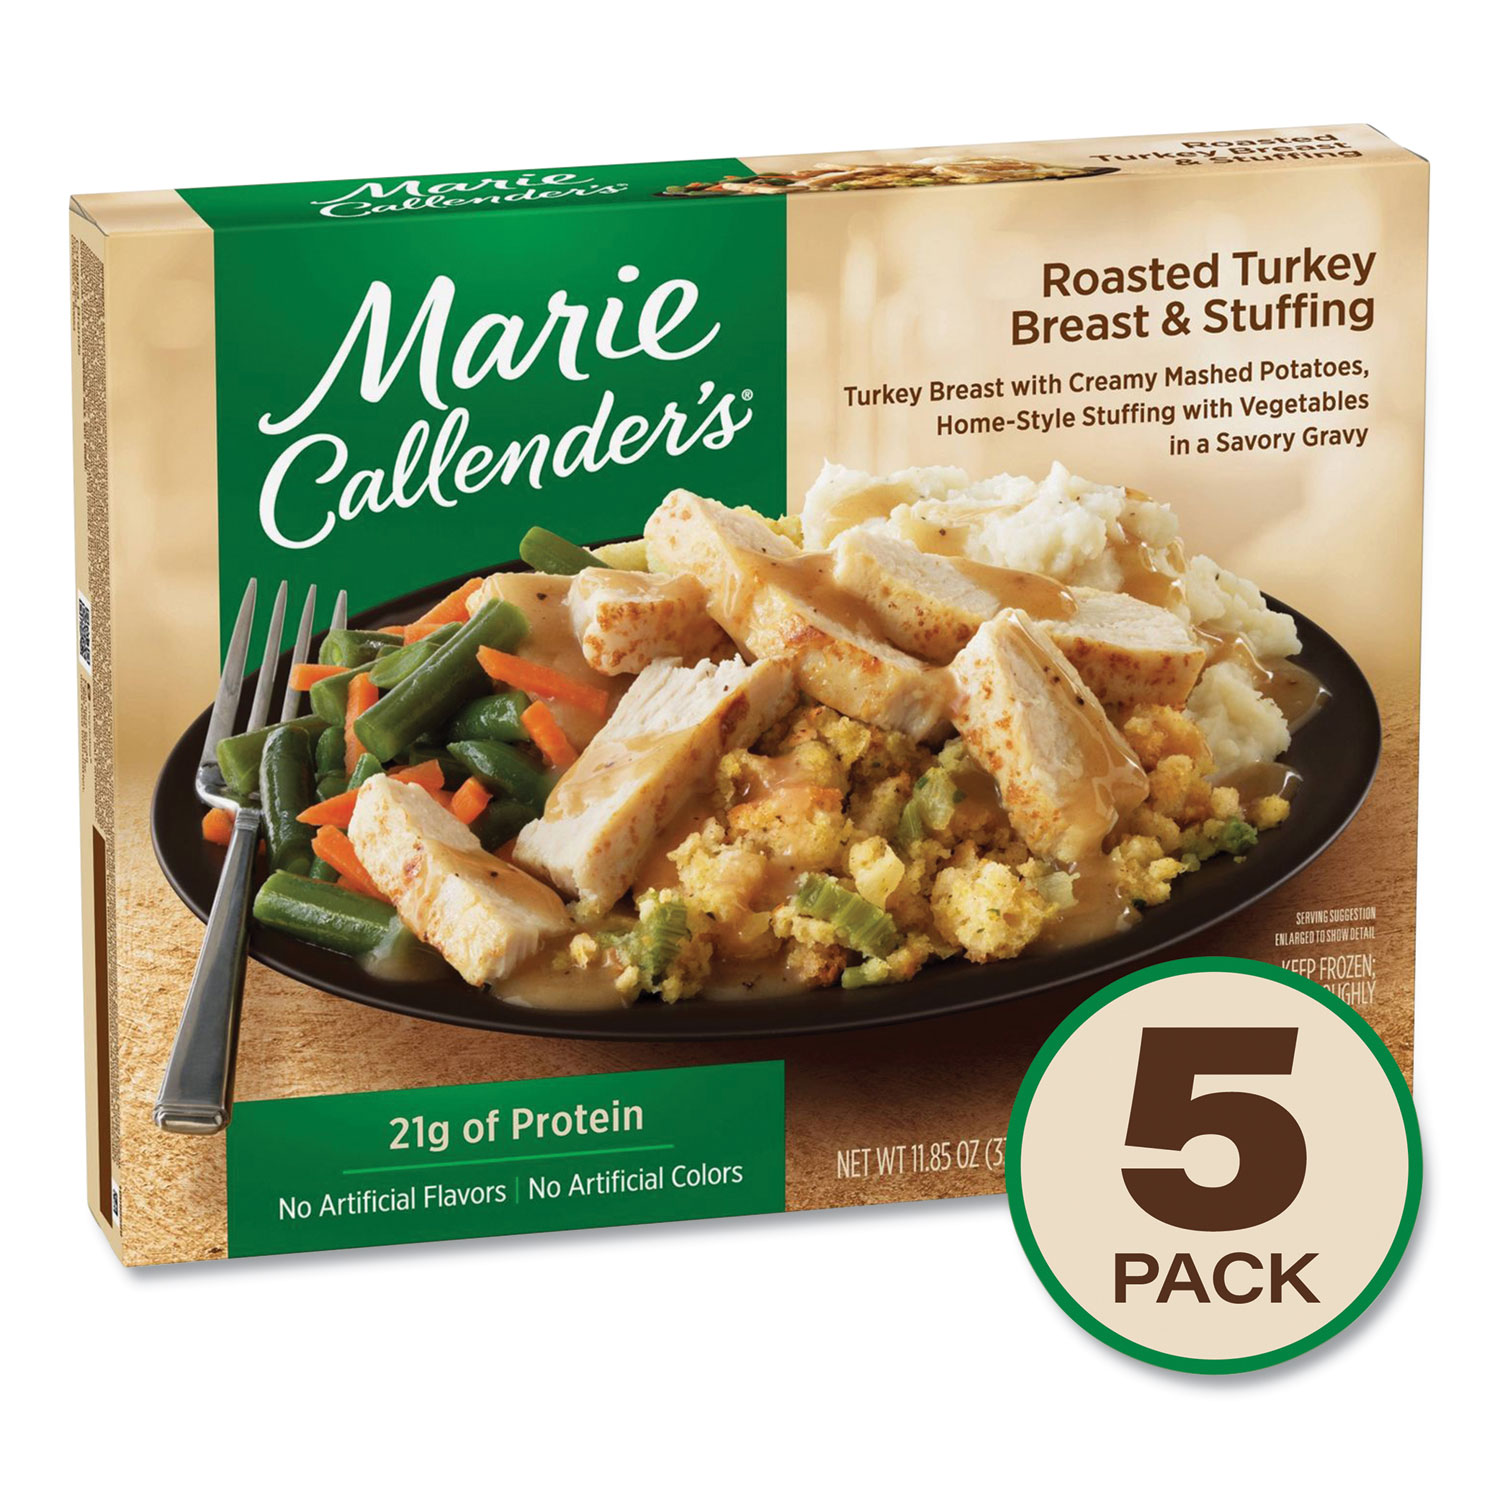  Marie Callender's 2113190531 Roasted Turkey Breast and Stuffing, 11.85 oz Box, 5/Pack, Free Delivery in 1-4 Business Days (GRR90300168) 